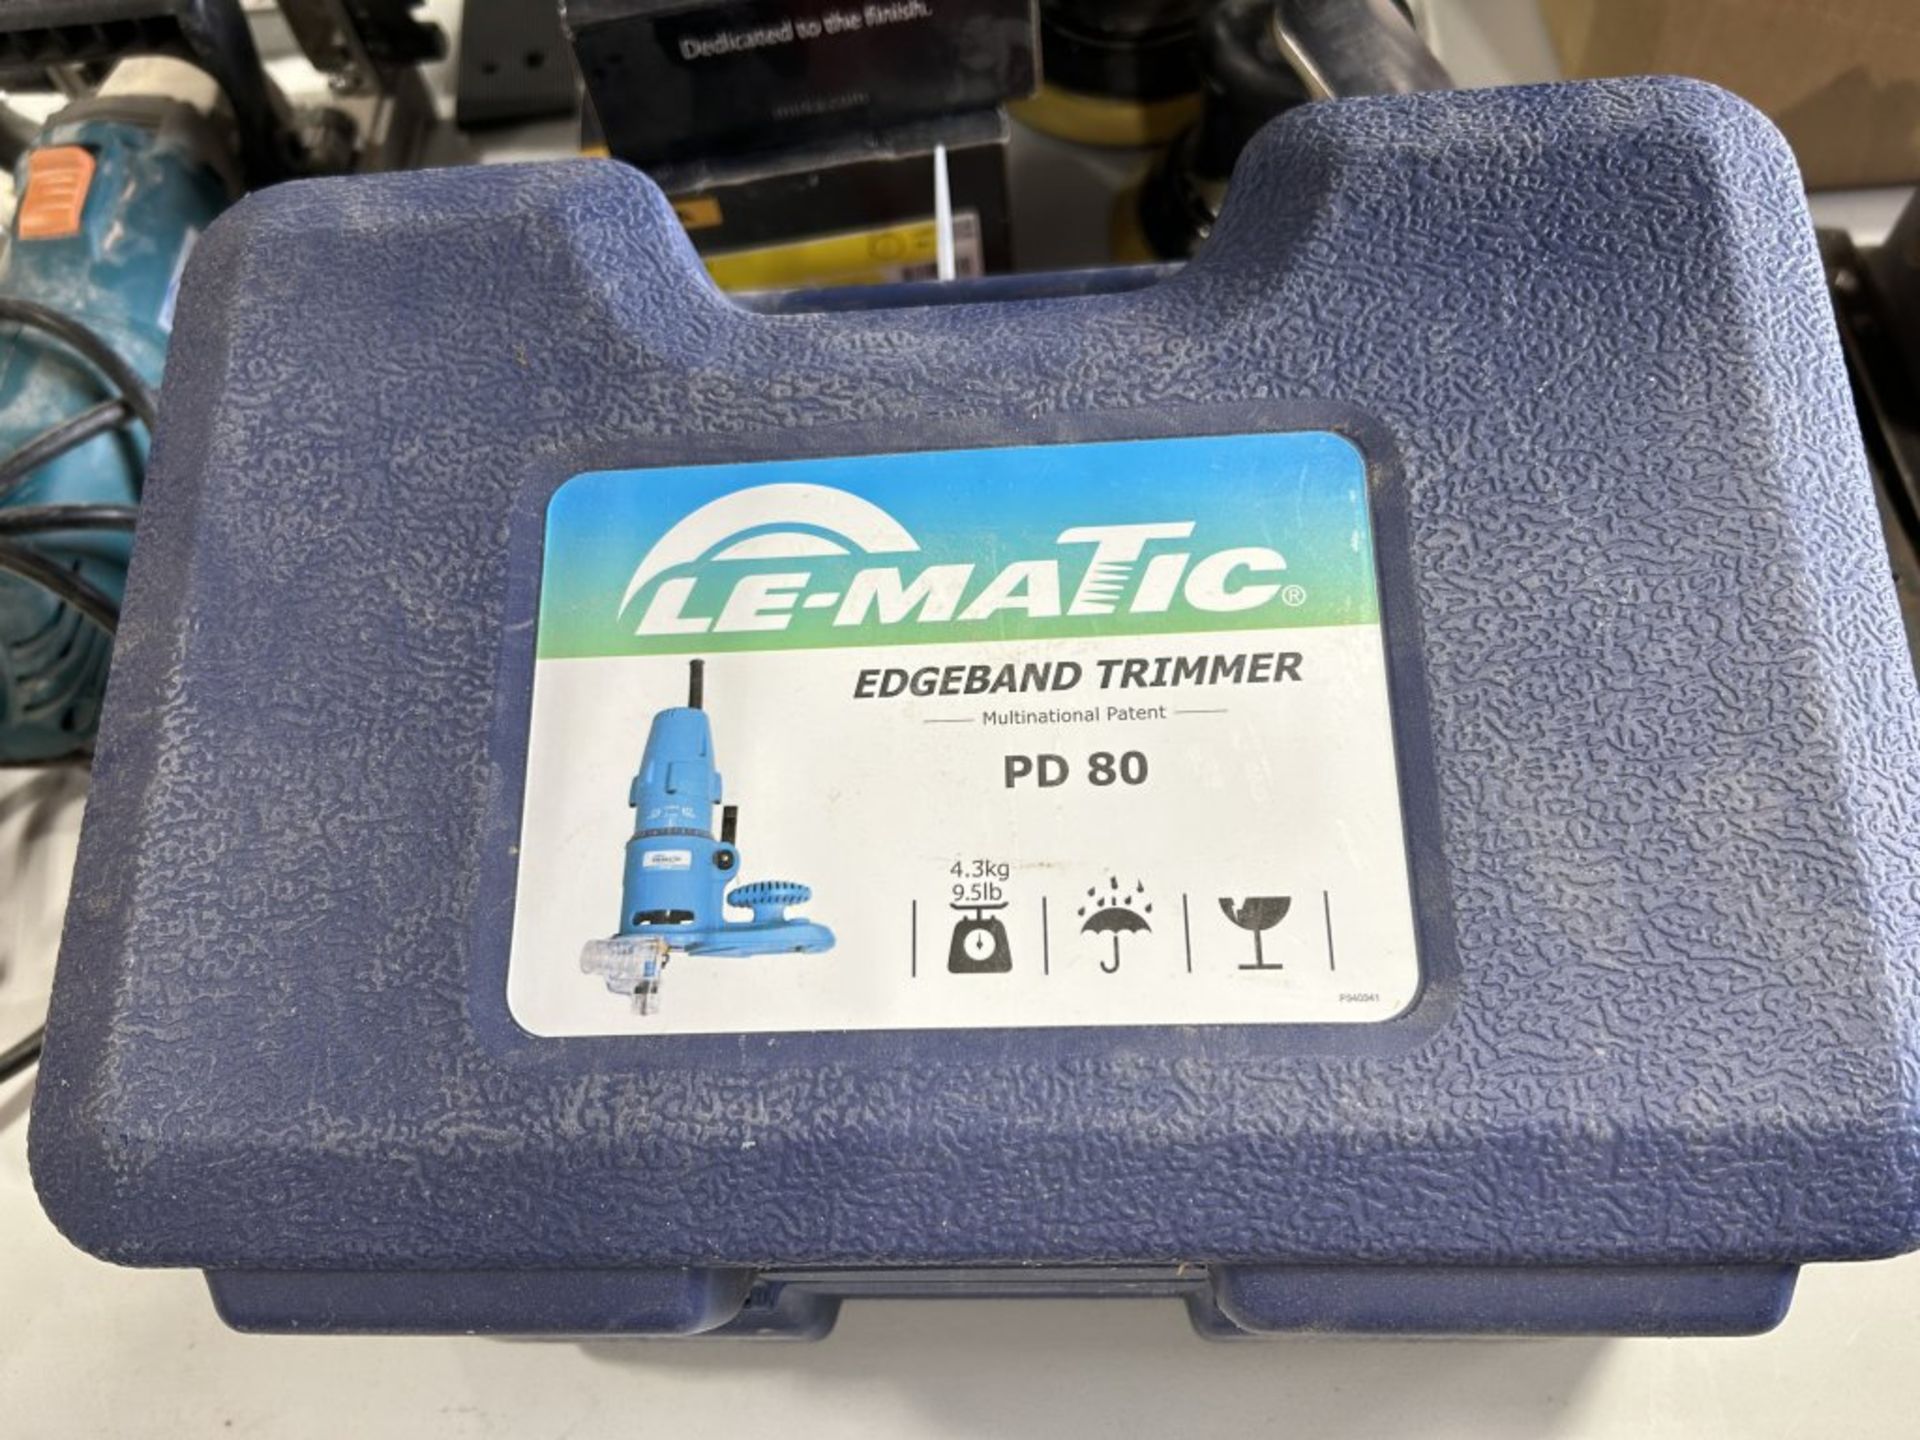 LE-MATIC PD80 EDGEBAND TRIMMER WITH CASE - Image 5 of 5